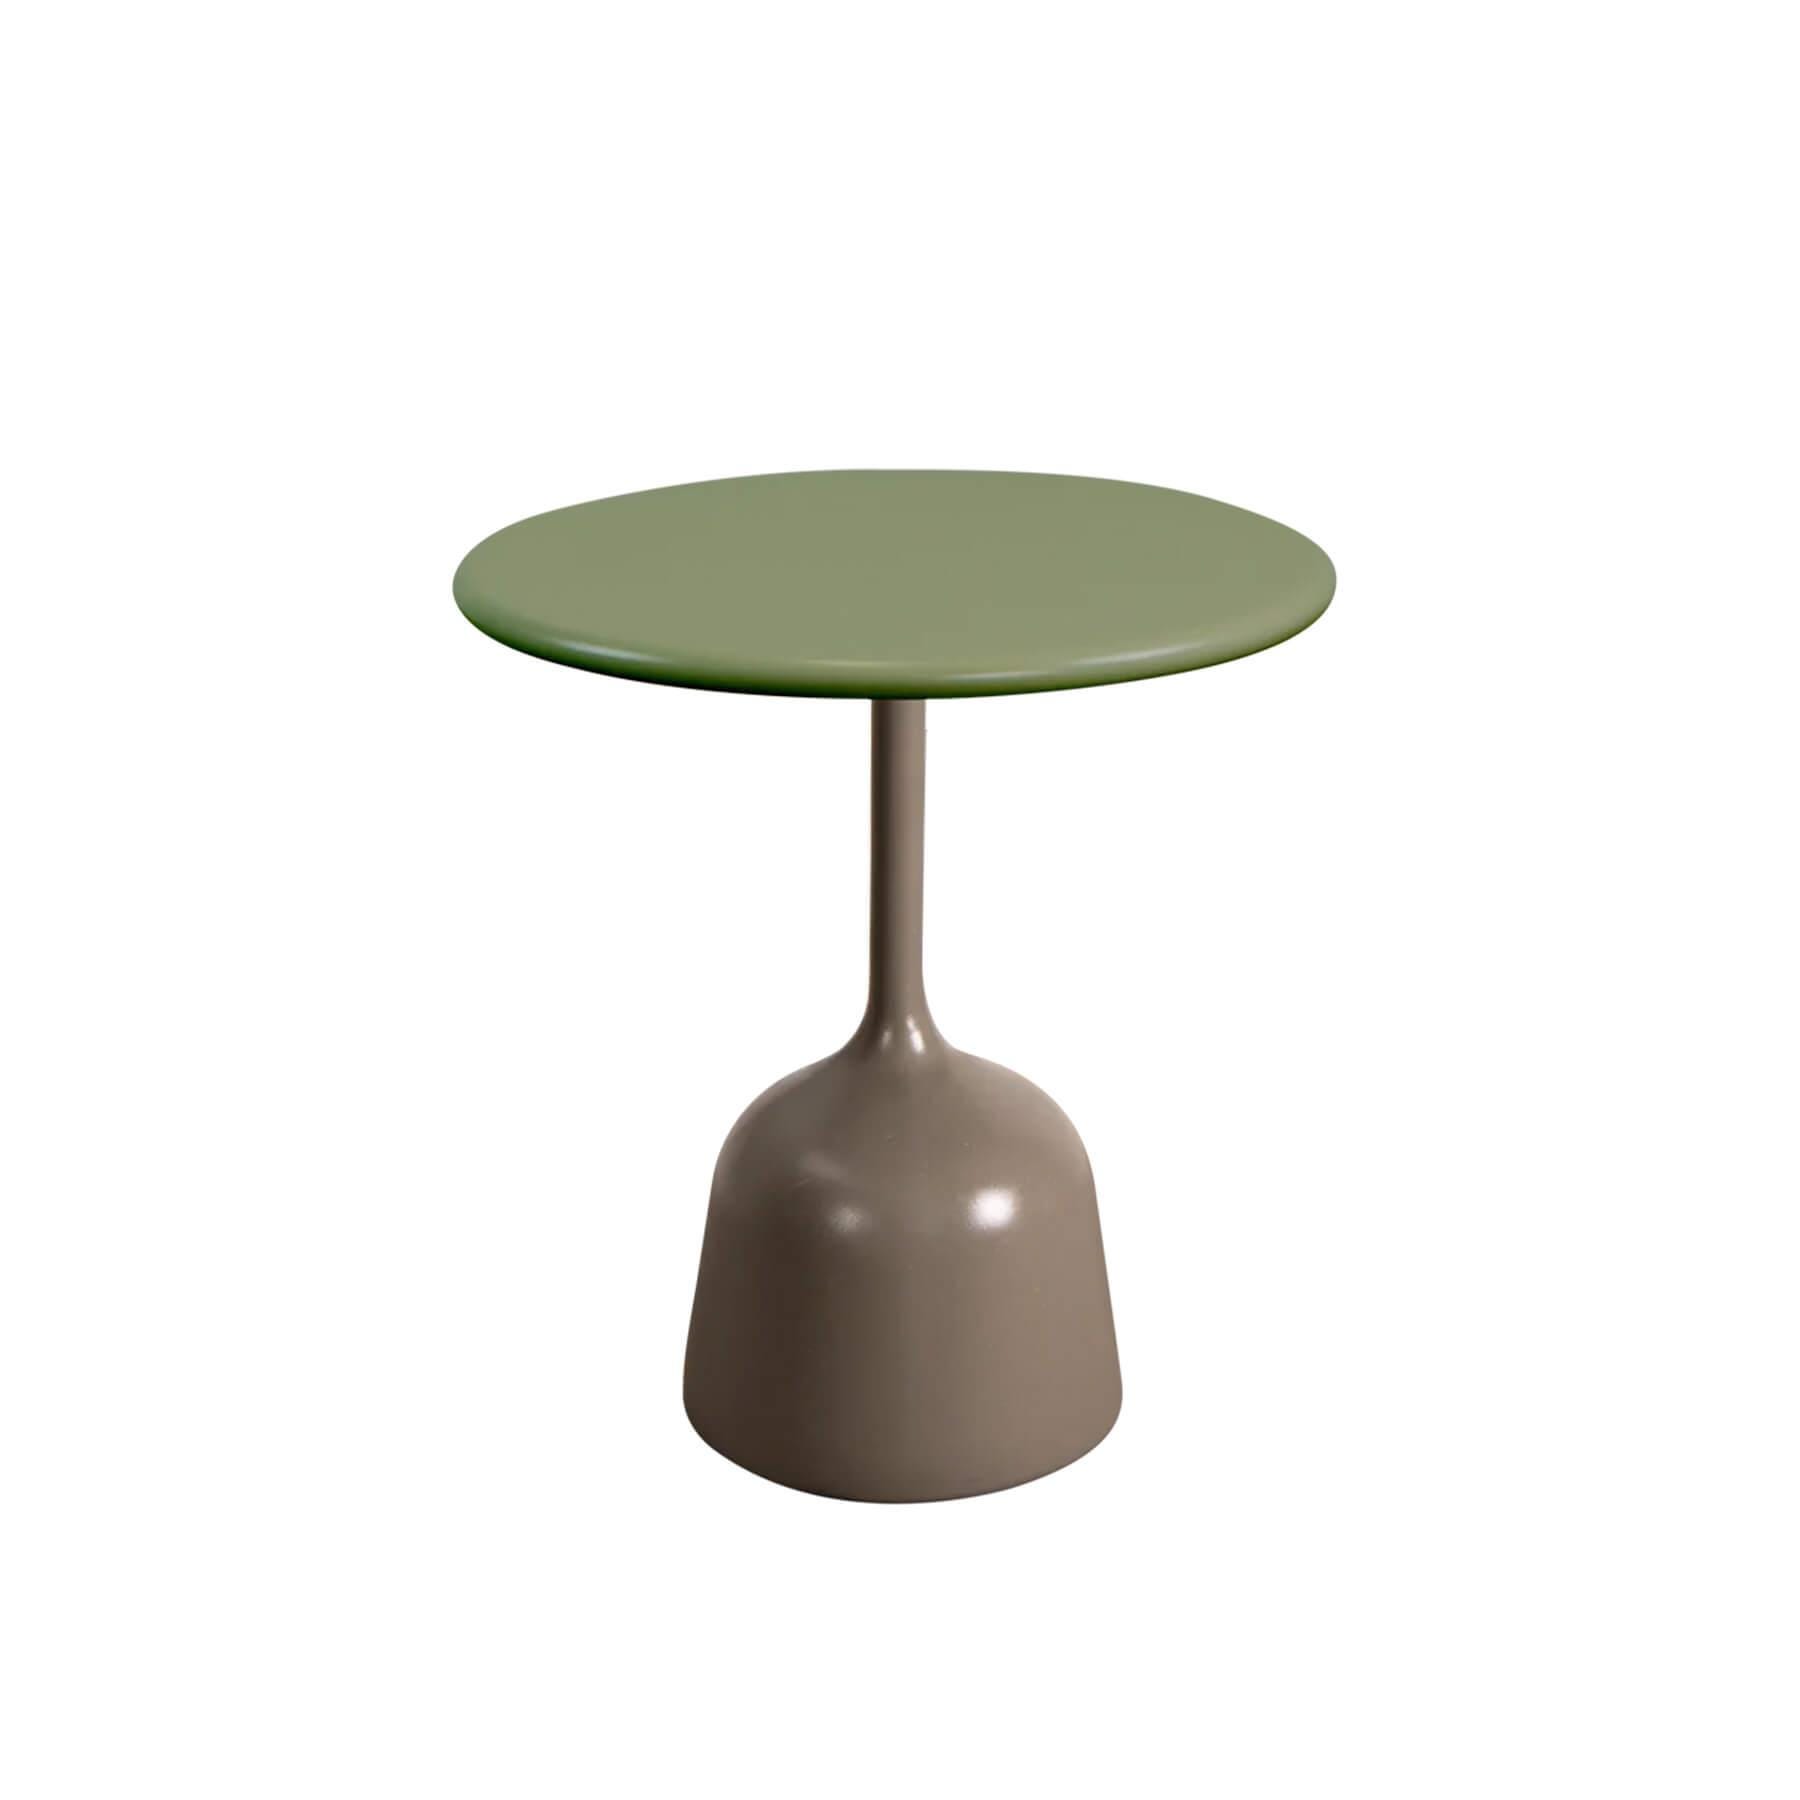 Caneline Glaze Coffee Table Small Taupe Base Olive Green Aluminium Designer Furniture From Holloways Of Ludlow